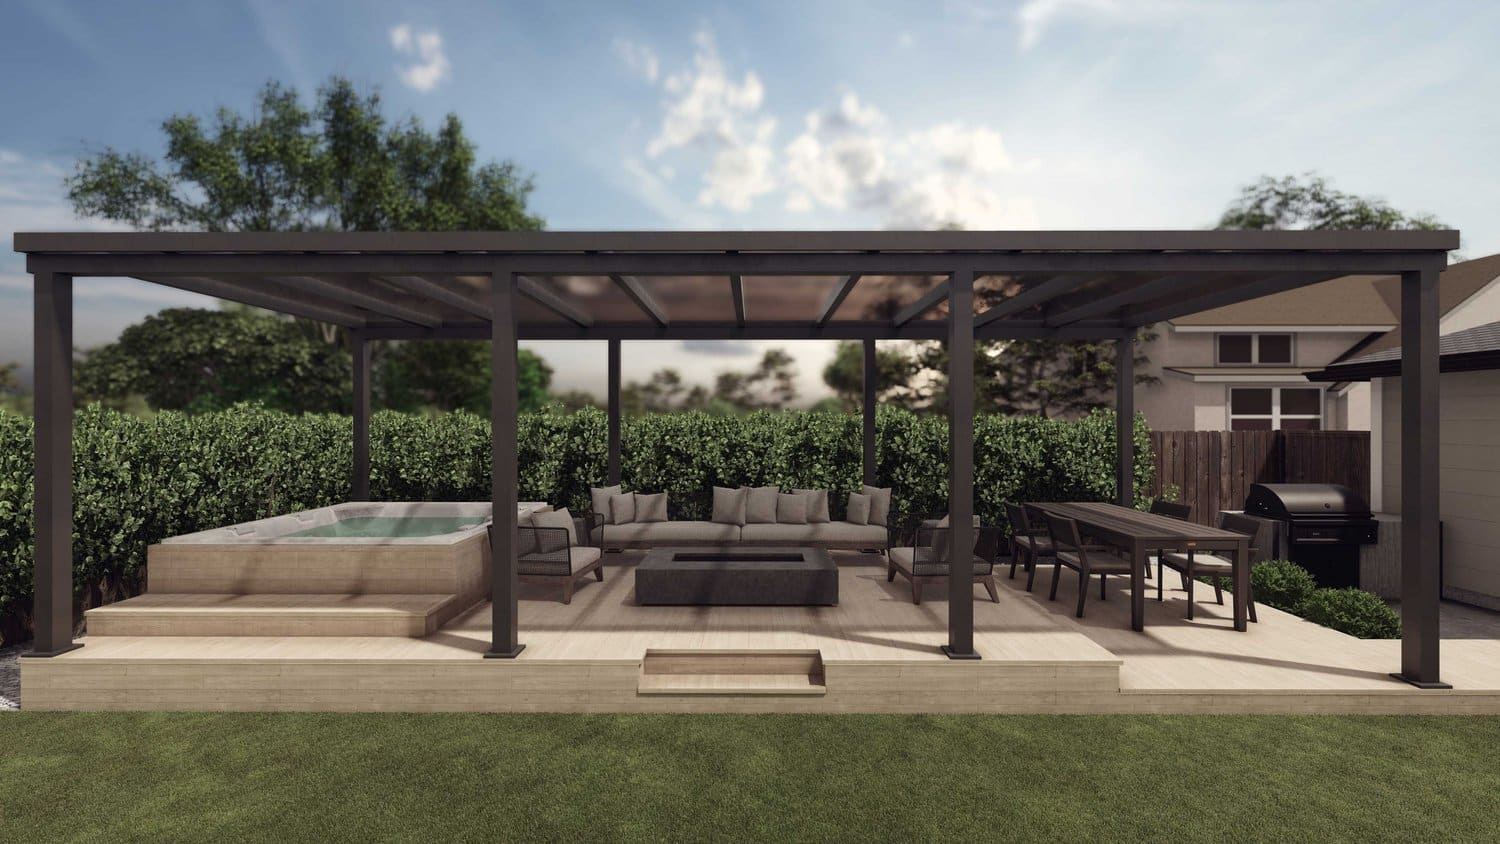 San Antonio backyard showing deck and patio with pergola over lounge area, hut tub, outdoor kitchen and dining area